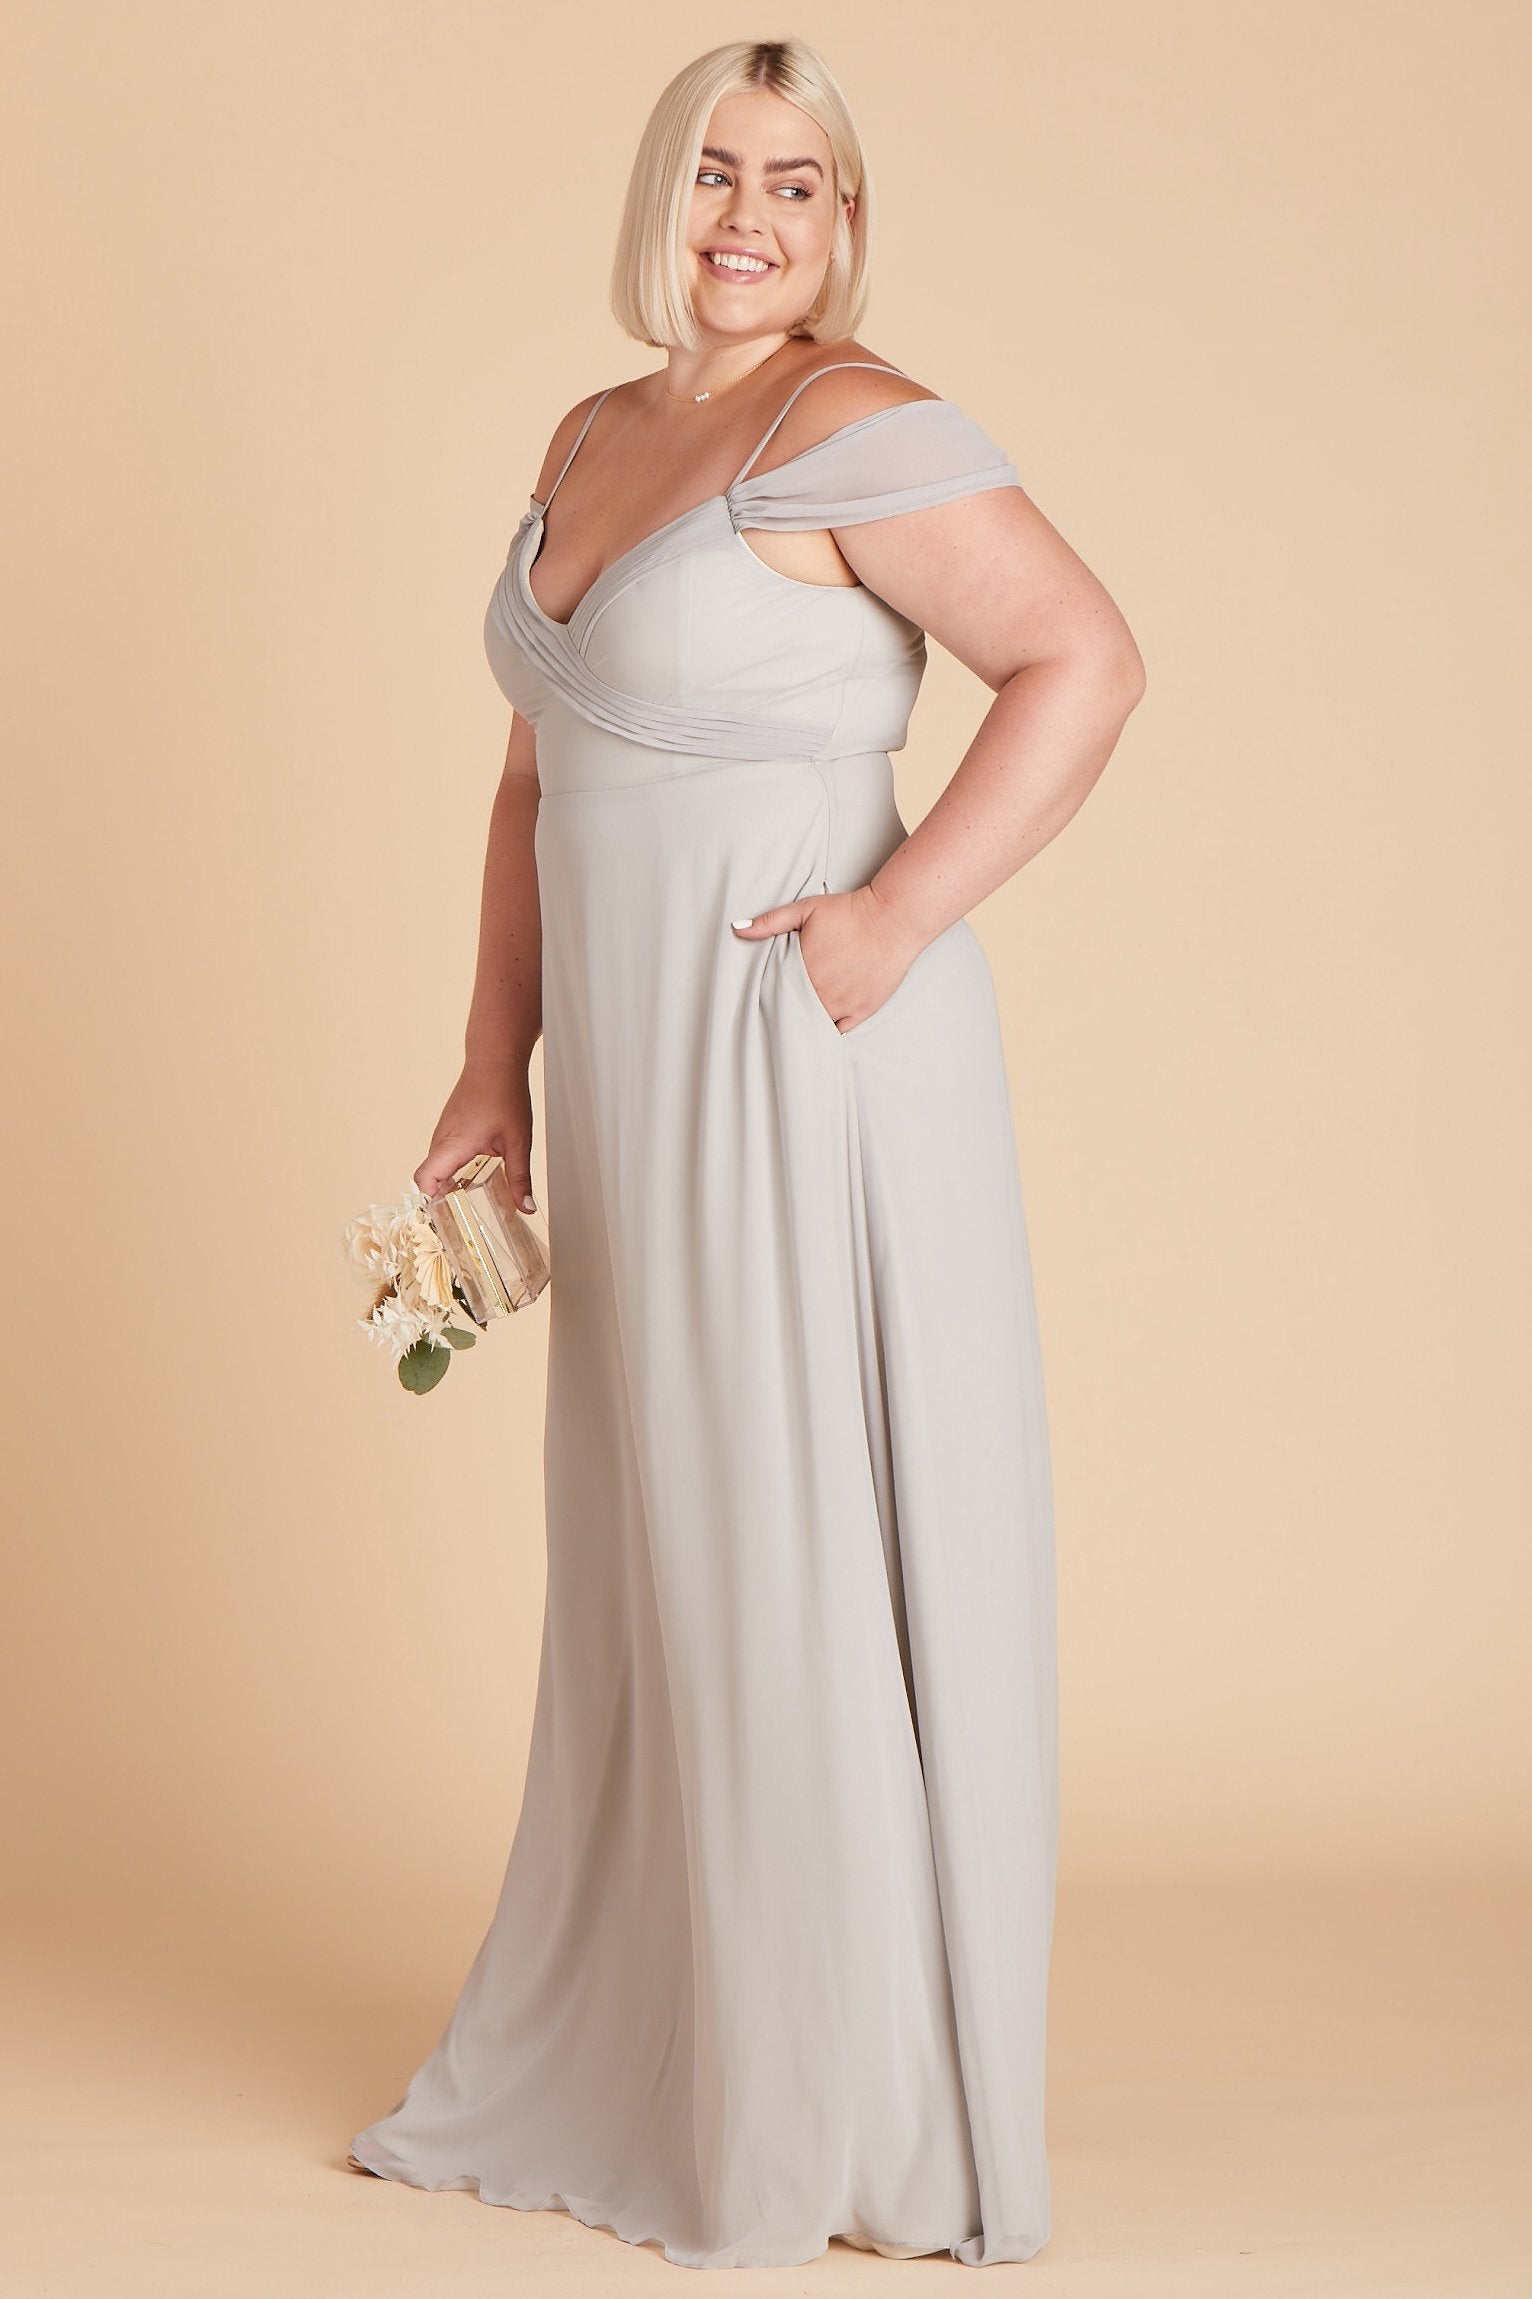 Spence convertible plus size bridesmaid dress in silver chiffon by Birdy Grey, side view with hand in pocket 